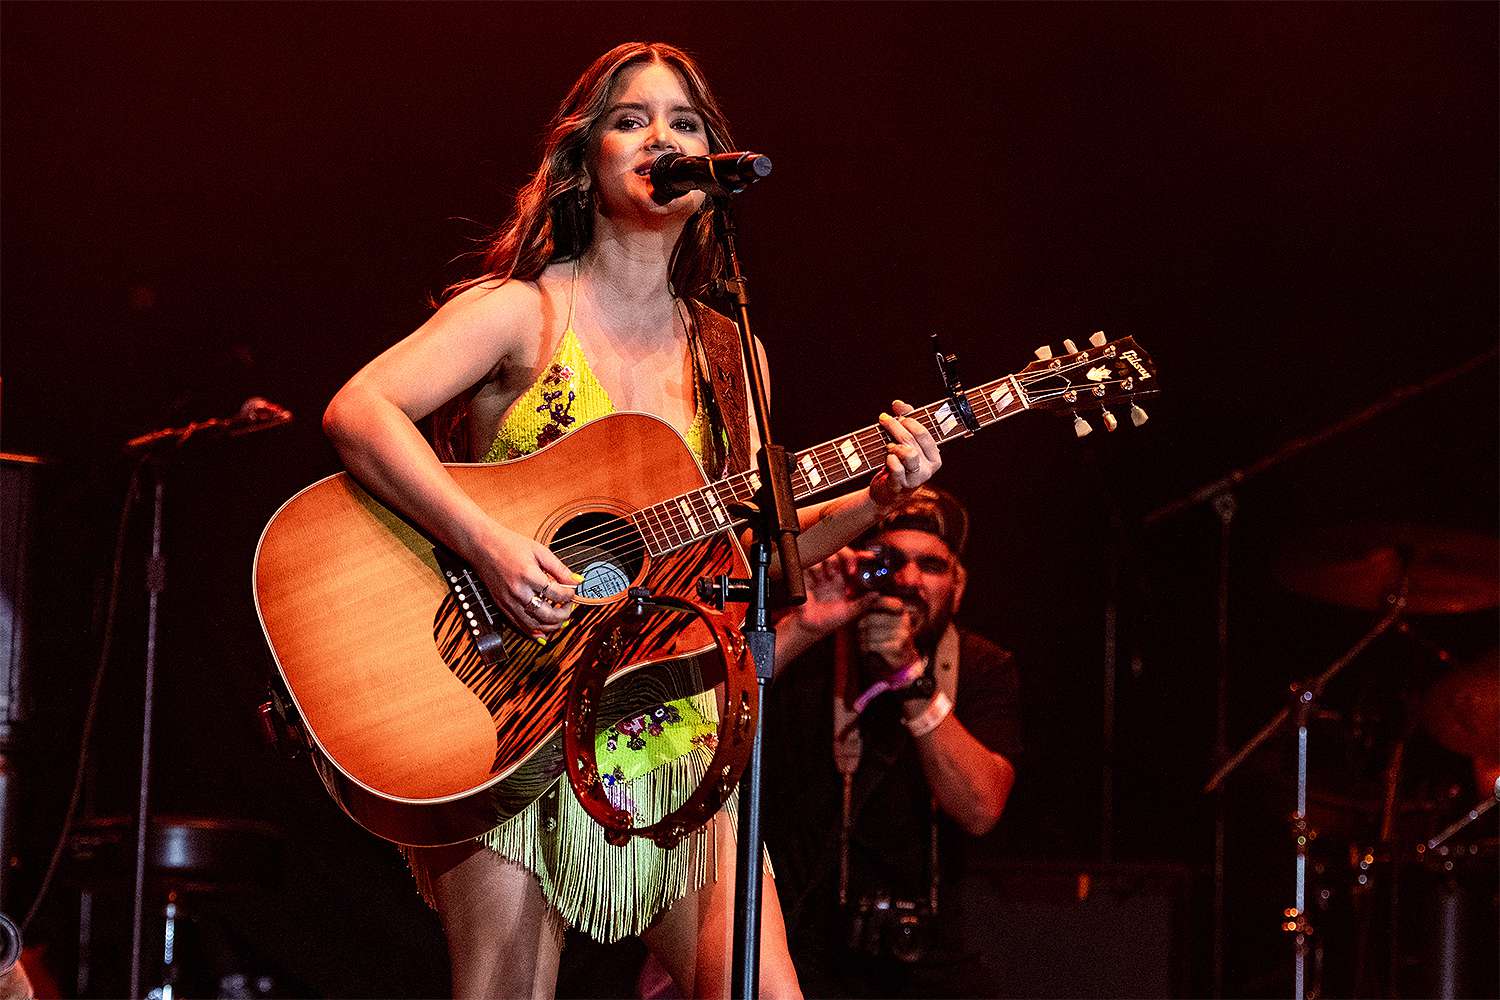 Maren Morris performs on the Mane Stage during the 2022 Stagecoach Festival on April 29, 2022 in Indio, California